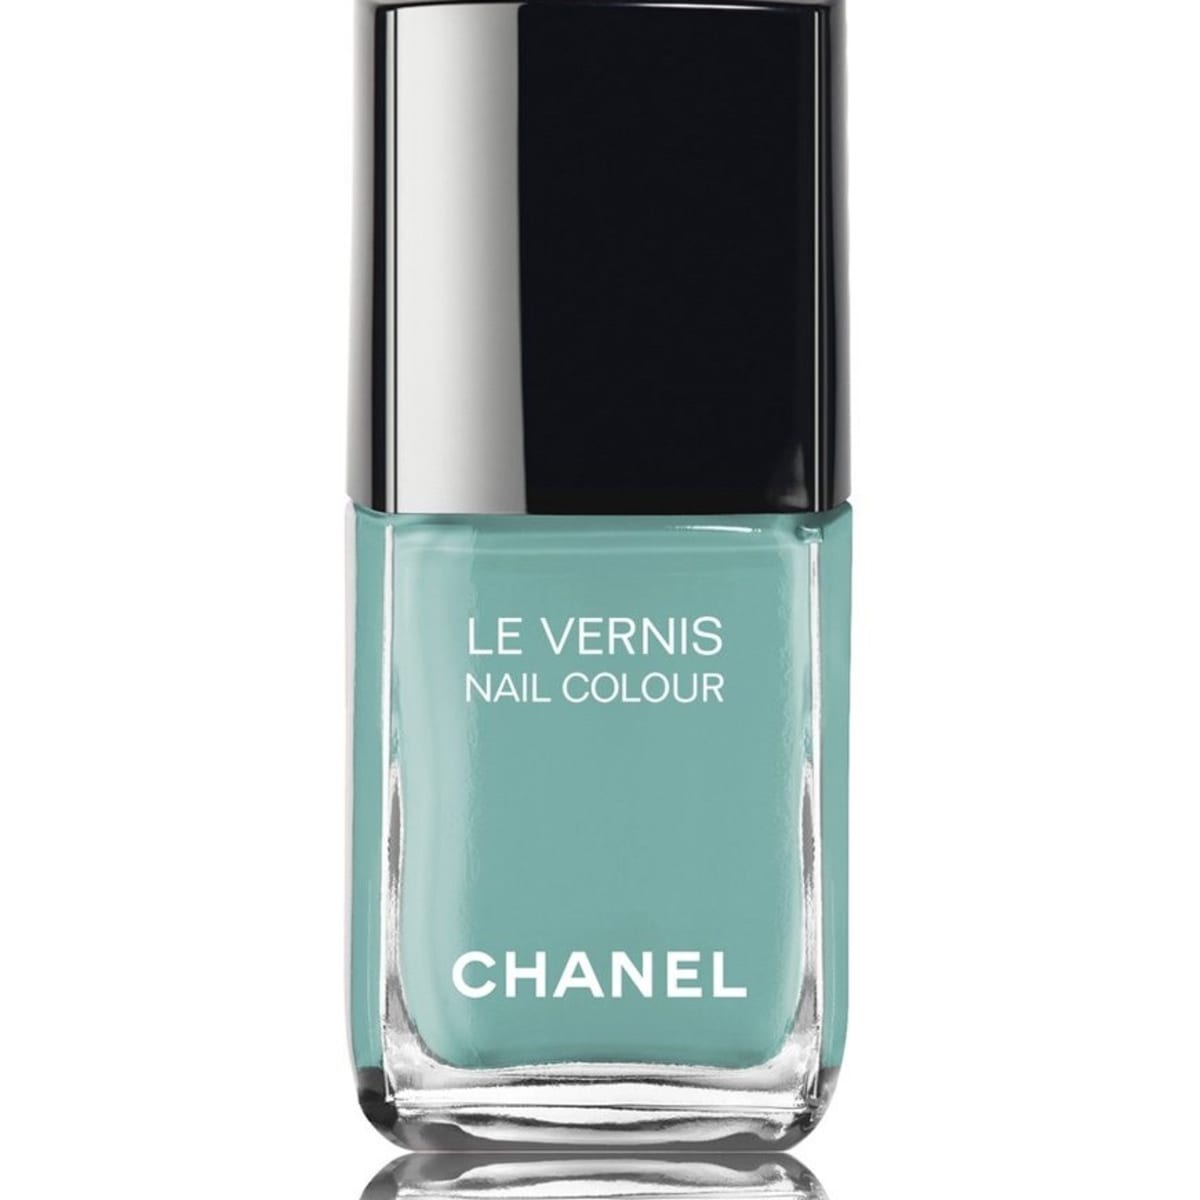 CHANEL LE VERNIS VERDE PASTELLO 590 + A SIDE OF GIRLY BITS - Beautygeeks